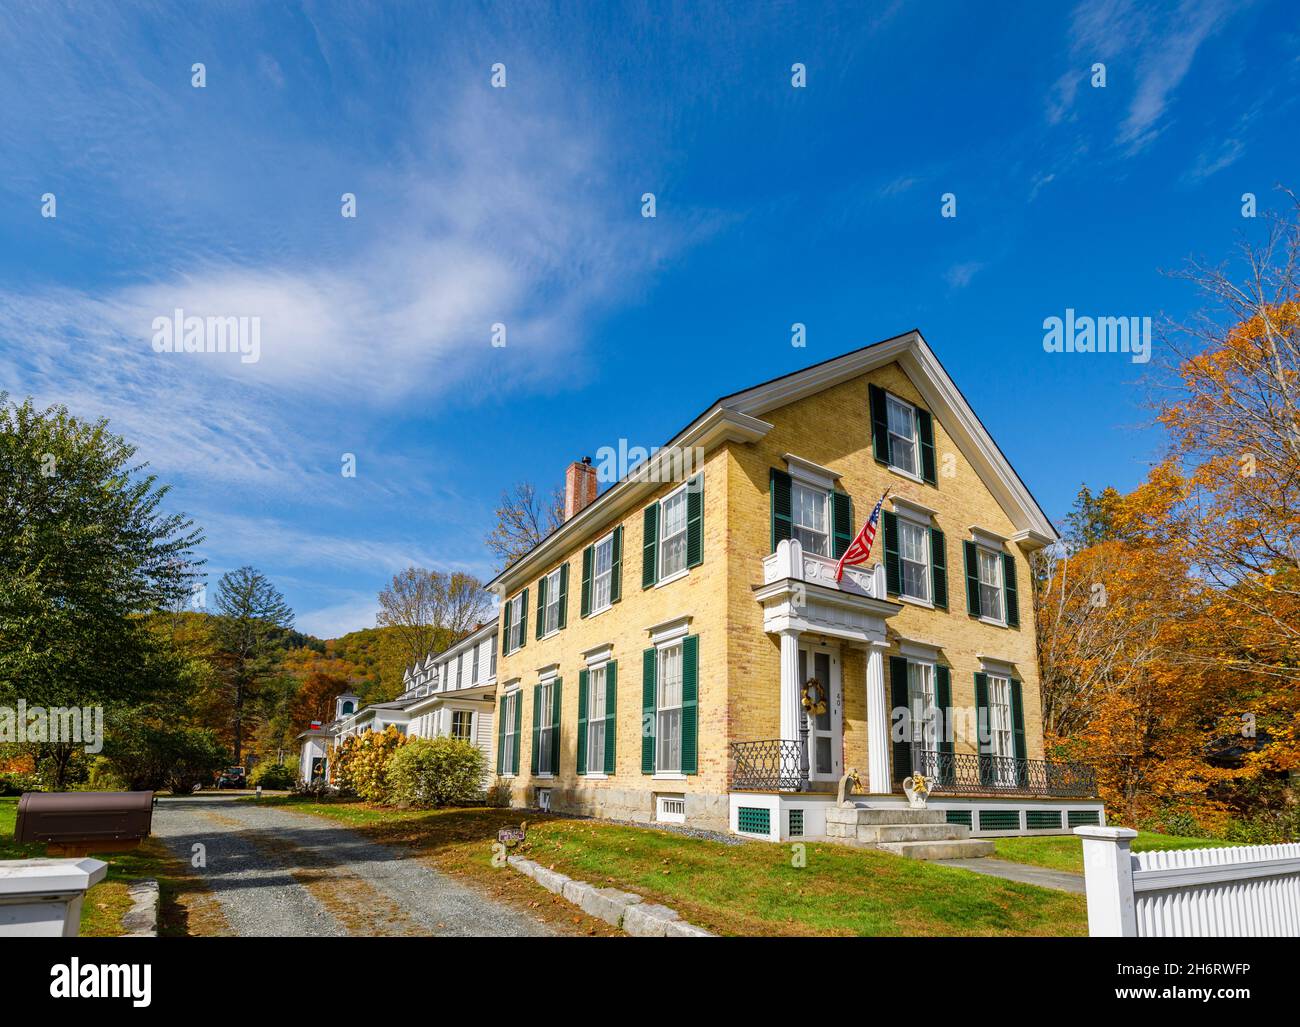 Typical local style large residential house with patriotic American flag in Woodstock, Vermont, New England, USA Stock Photo